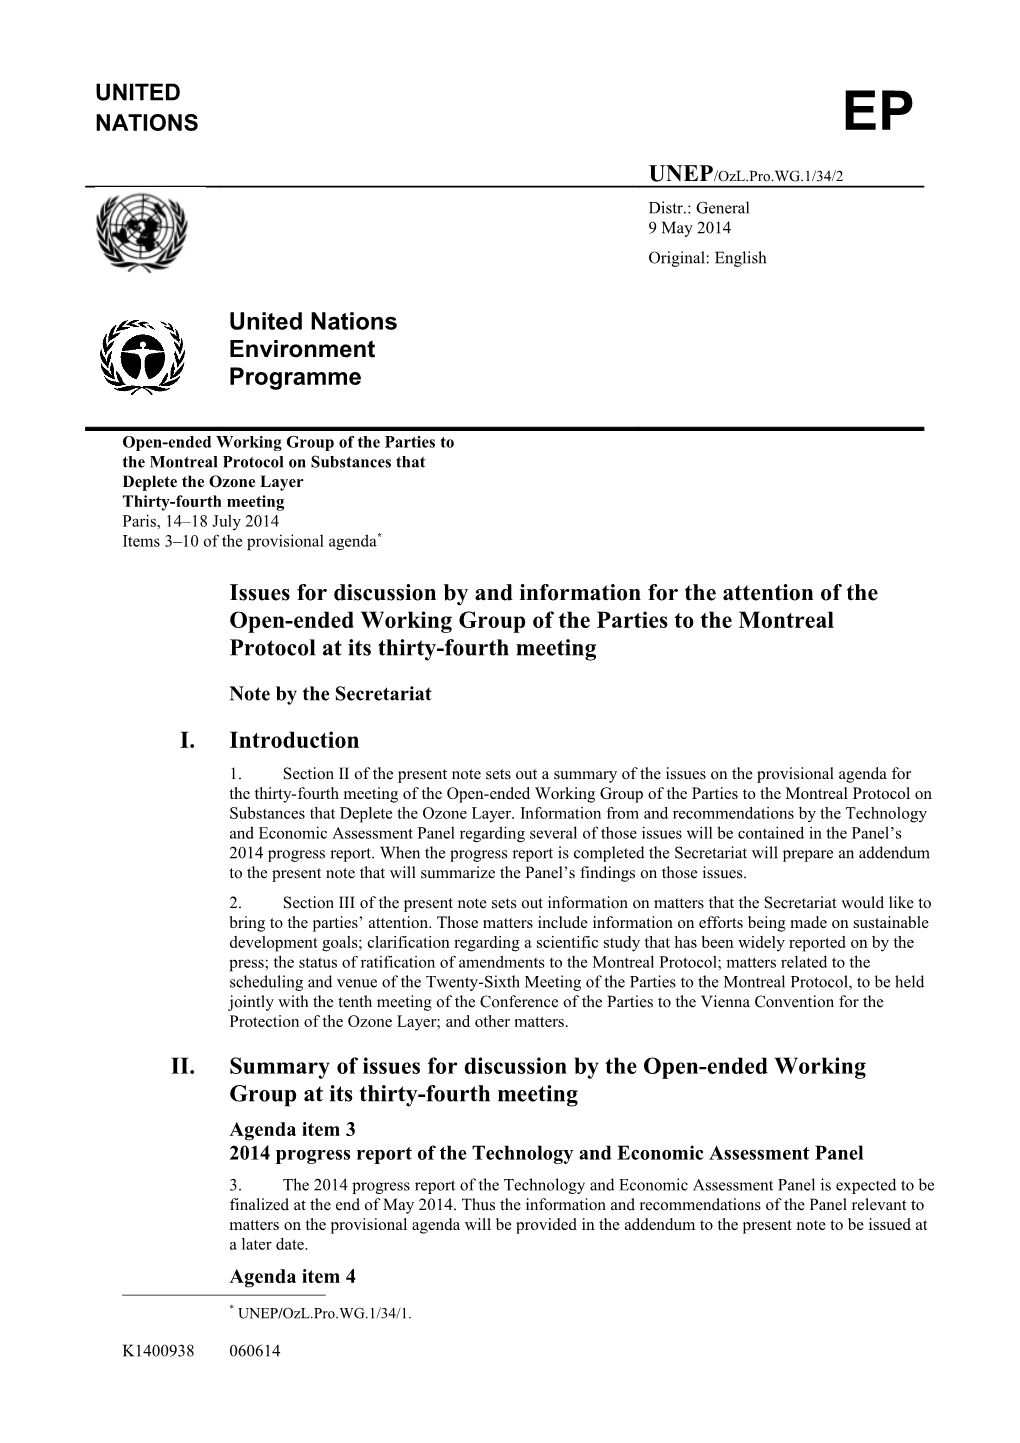 Issues for Discussion by and Information for the Attention of the Open-Ended Working Group